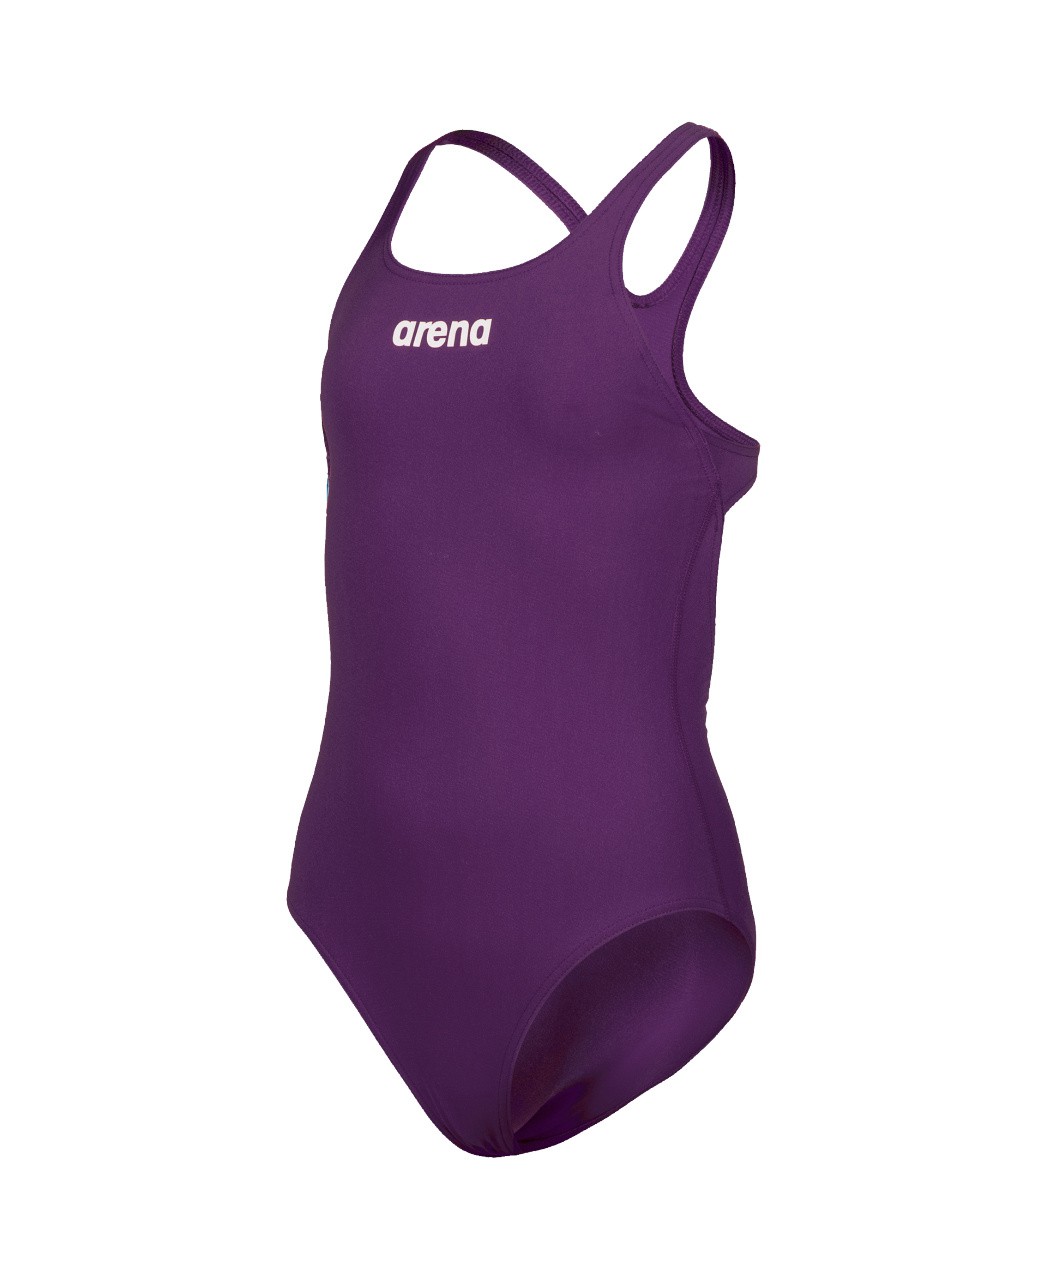 G Team Swimsuit Pro Solid